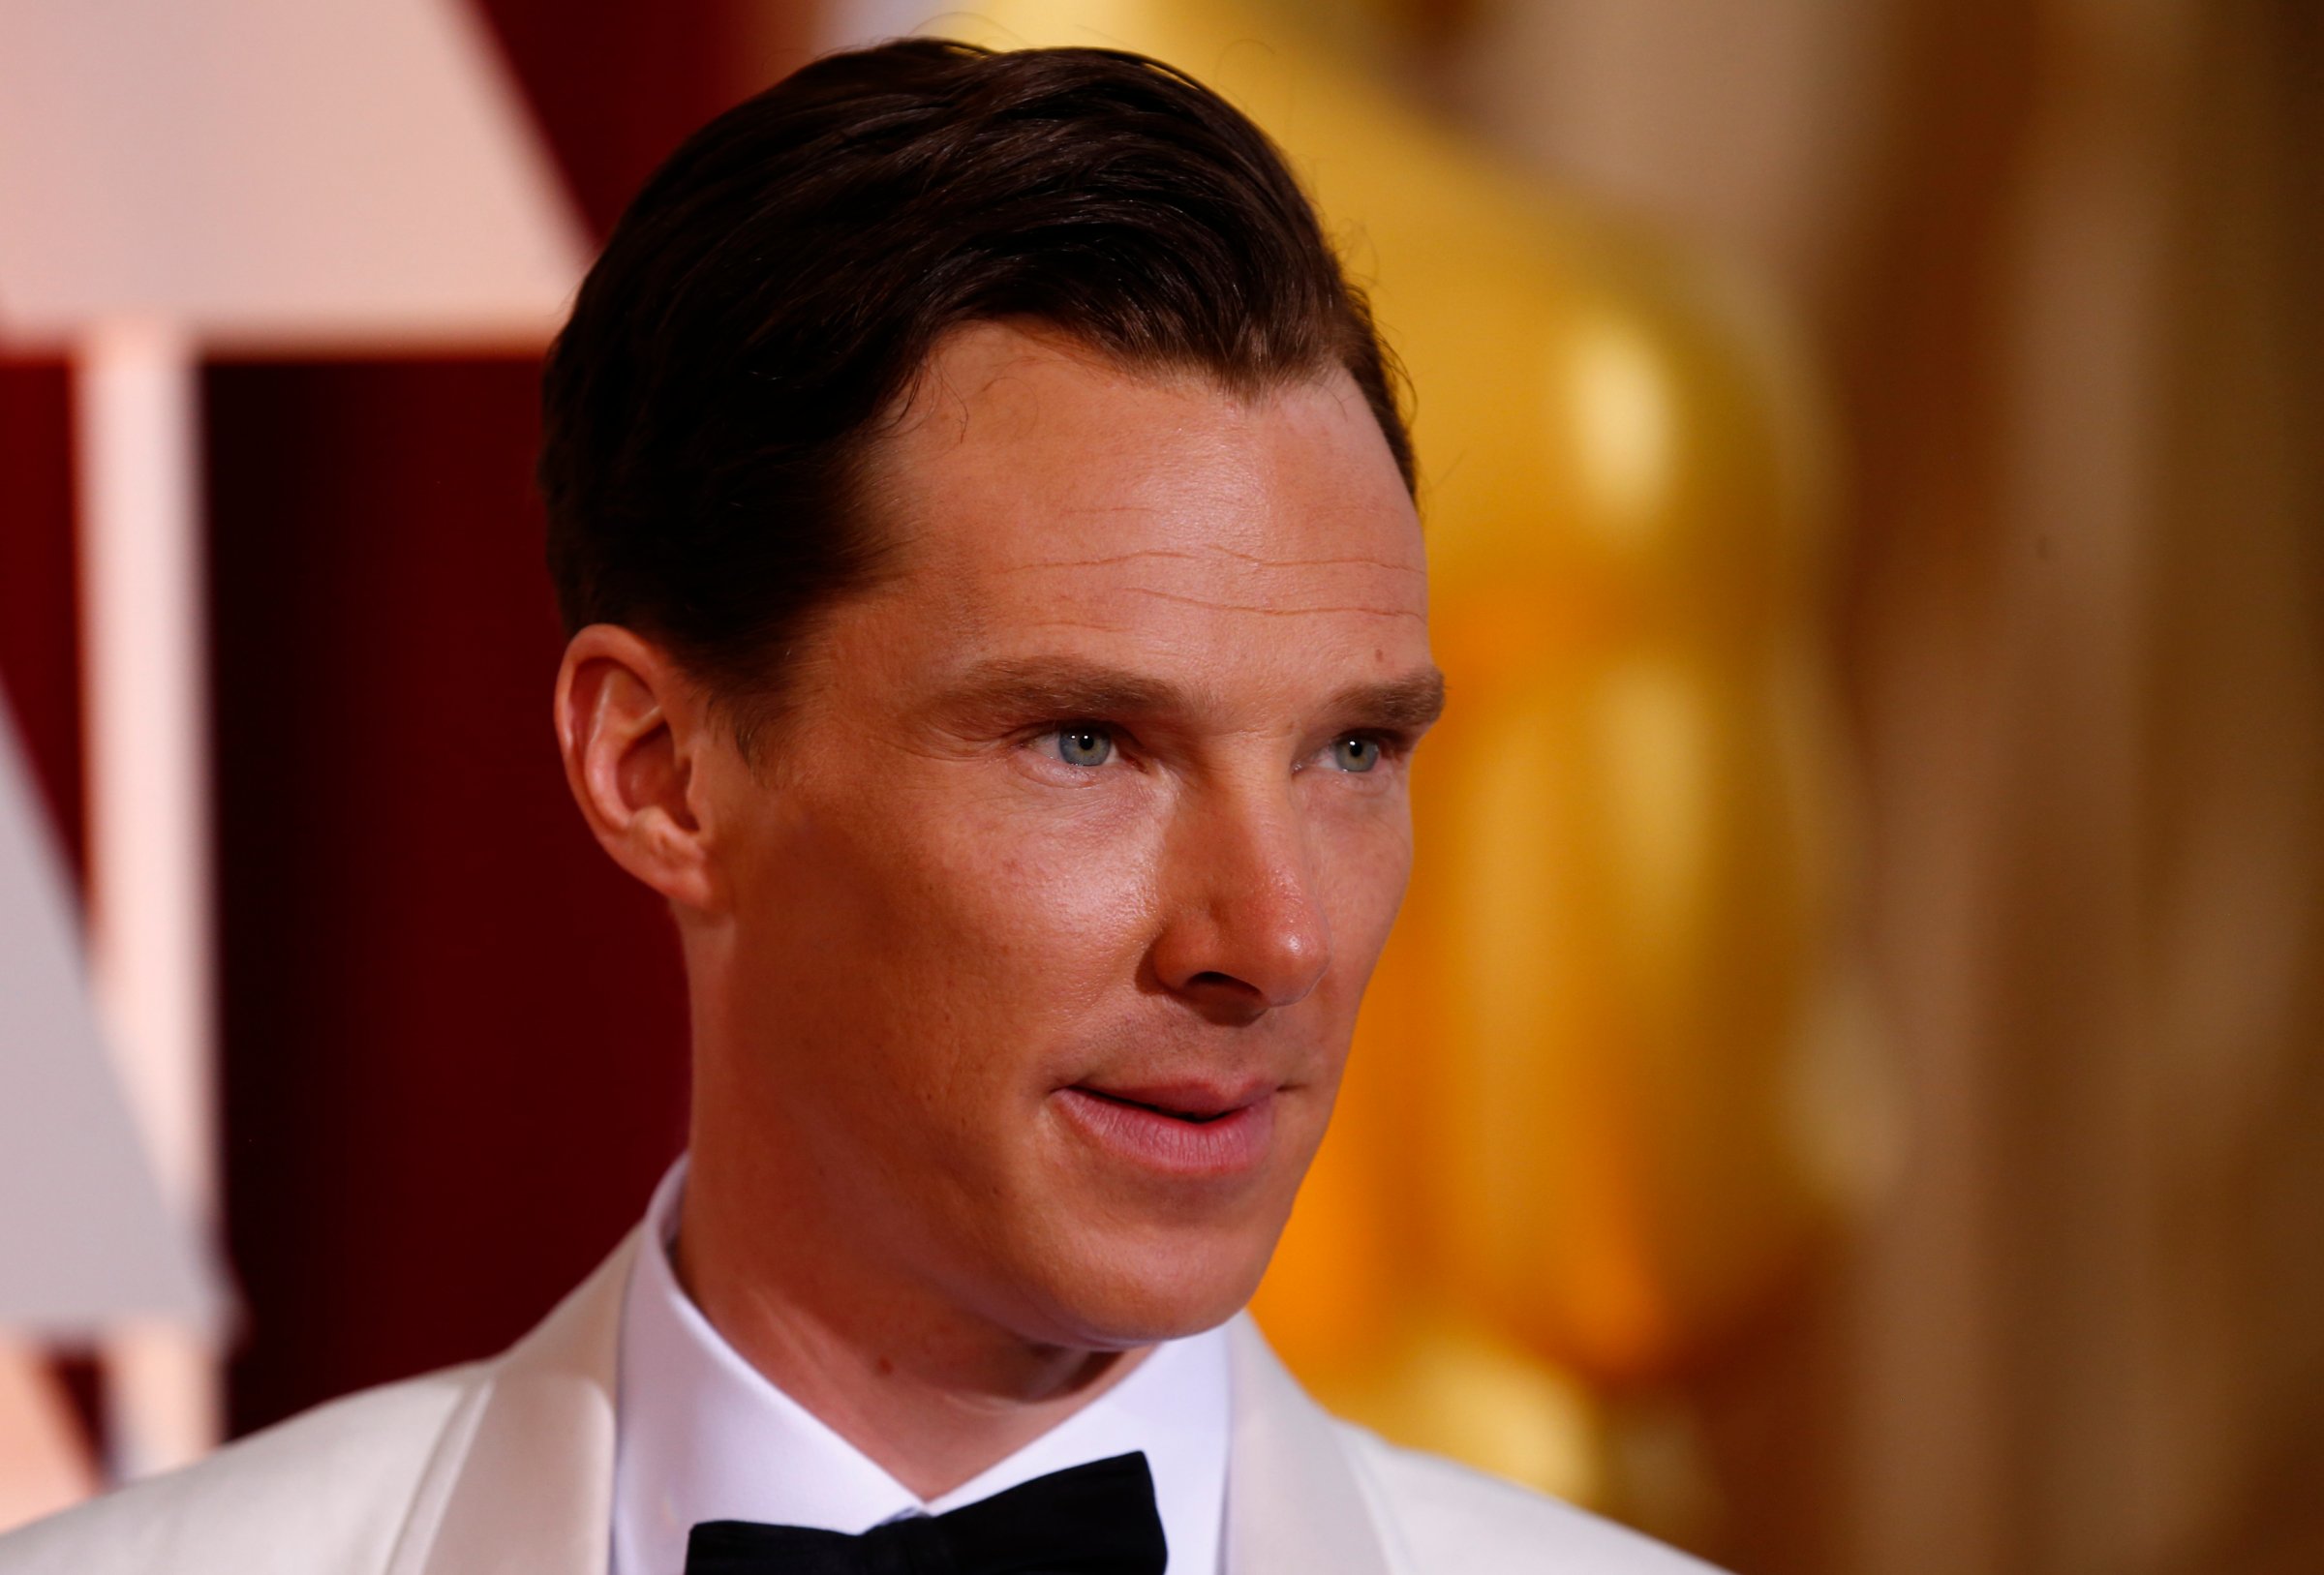 Benedict Cumberbatch, best actor nominee for his role in The Imitation Game, arrives at the 87th Academy Awards in Hollywood, California February 22, 2015